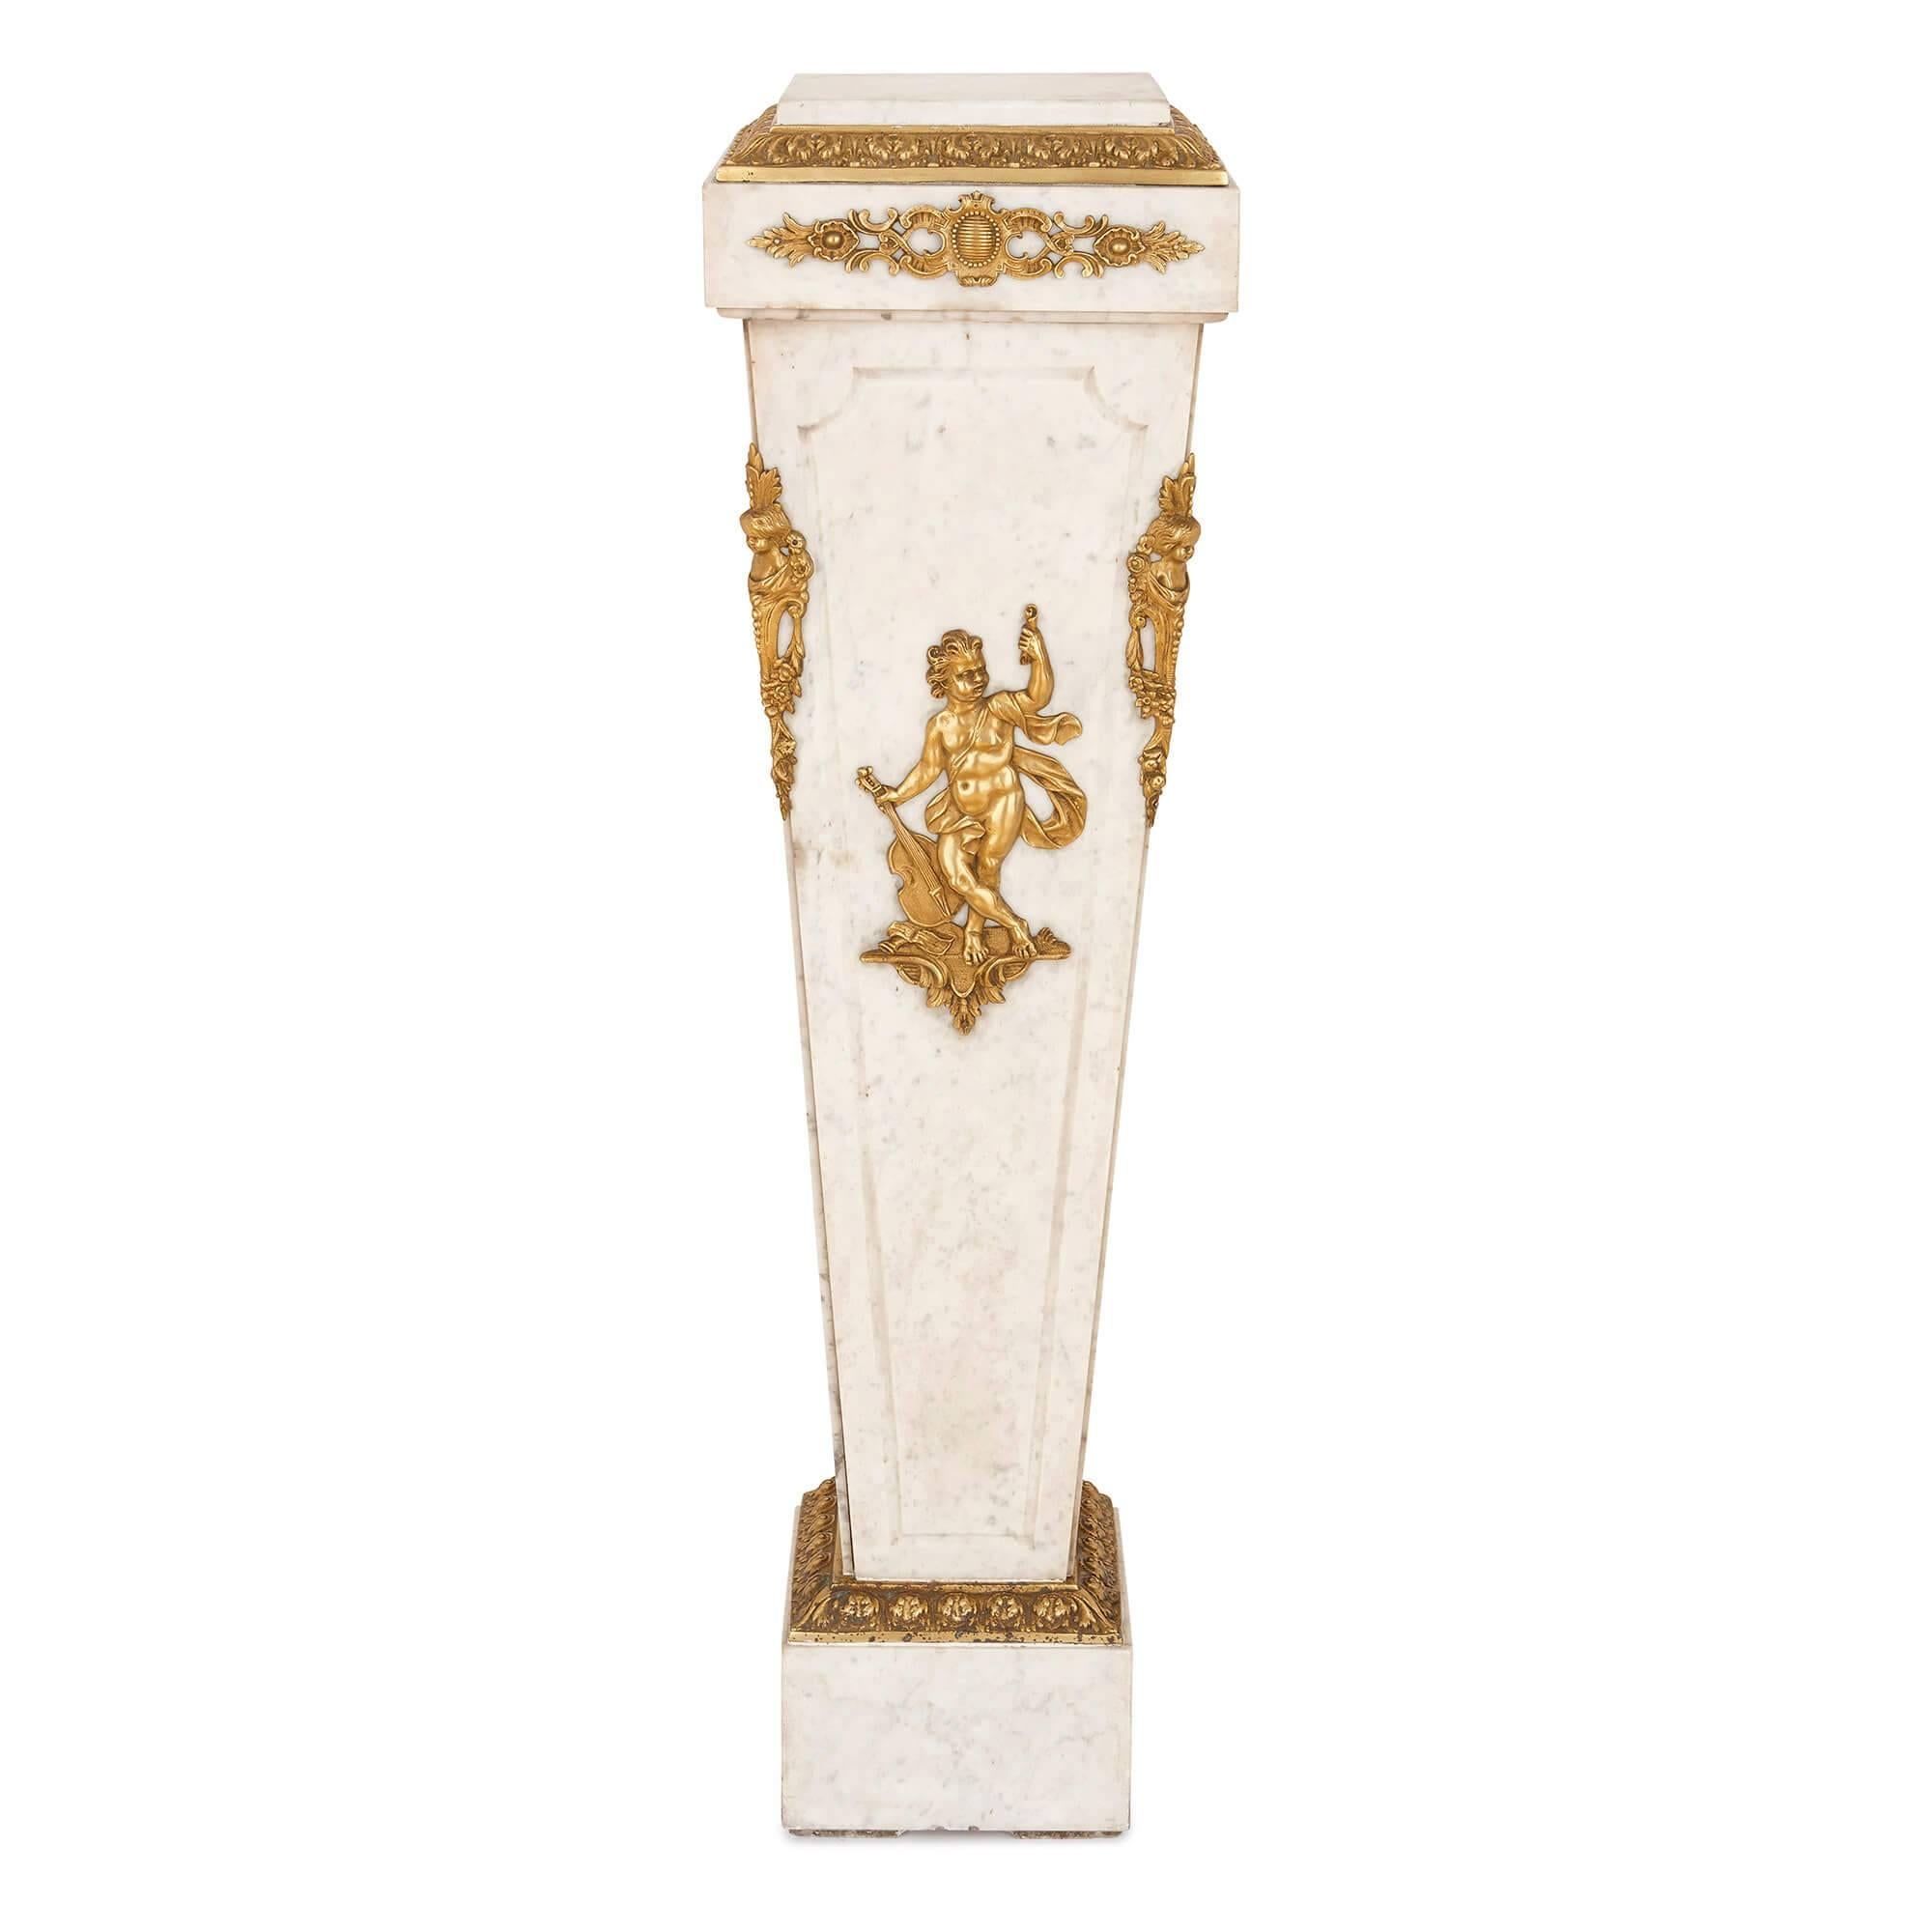 This refined pedestal is crafted from sumptuous materials and has an elegant and unusual shape. It could be used a standalone piece but would also make the perfect stand upon which to display a vase, urn, sculpture or other decorative object.